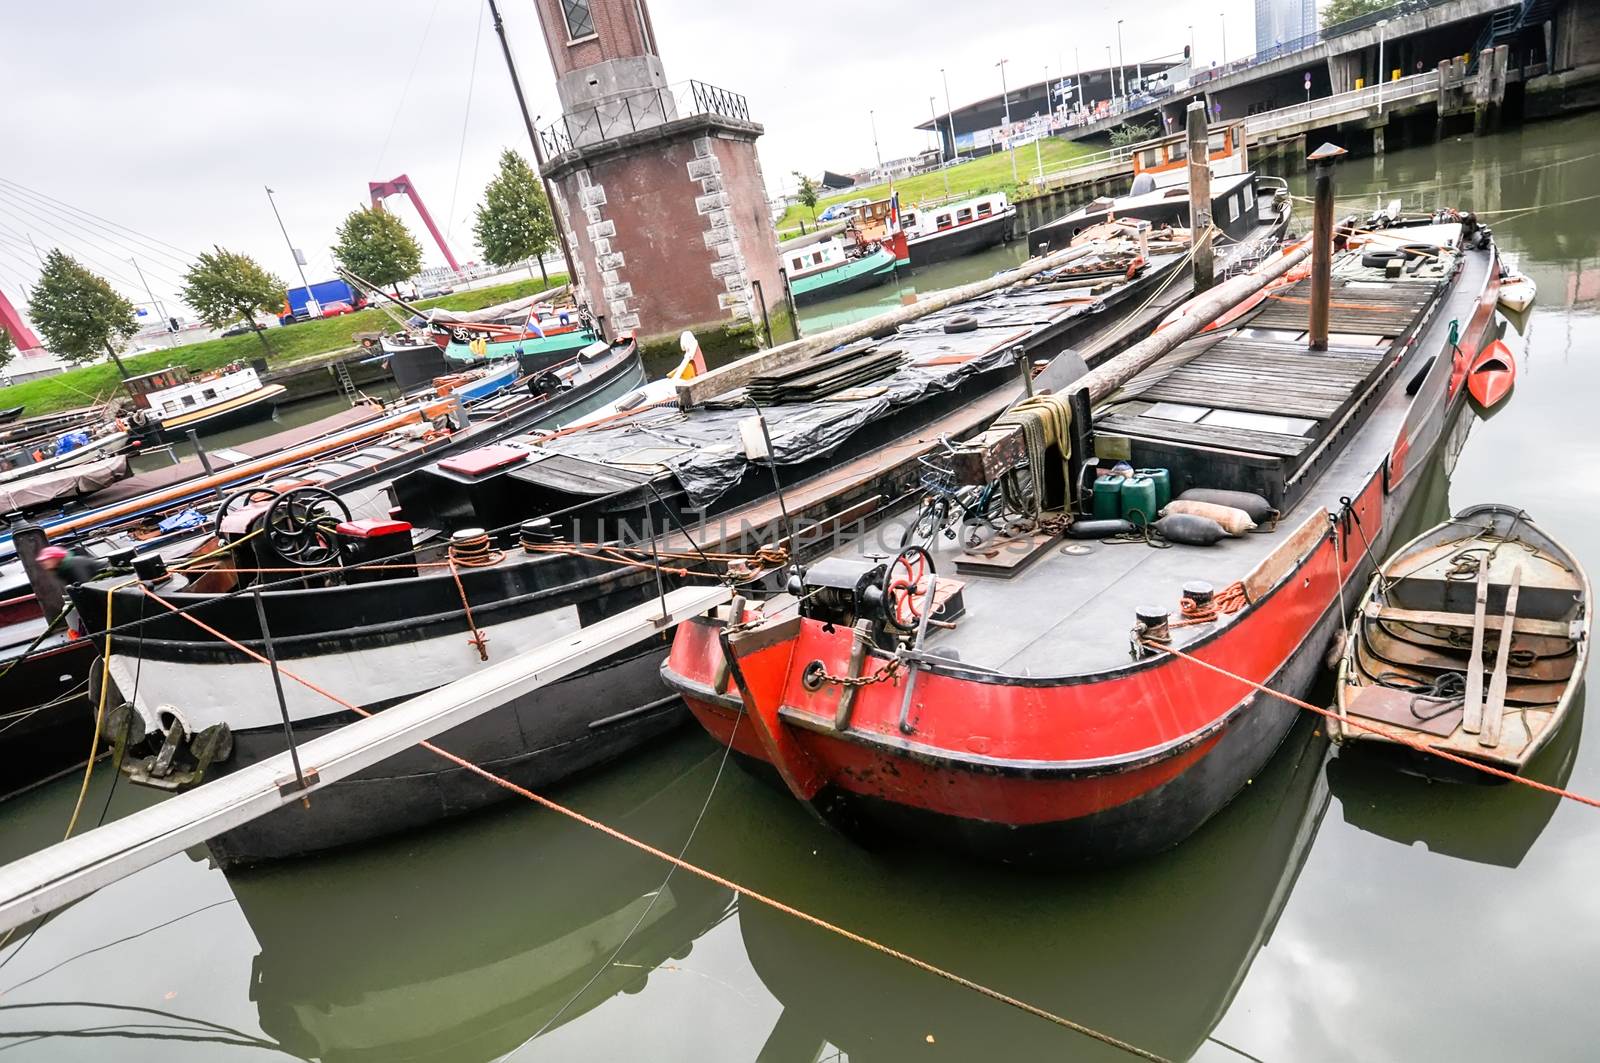 view at old boats on Rotterdam canal  by vlaru